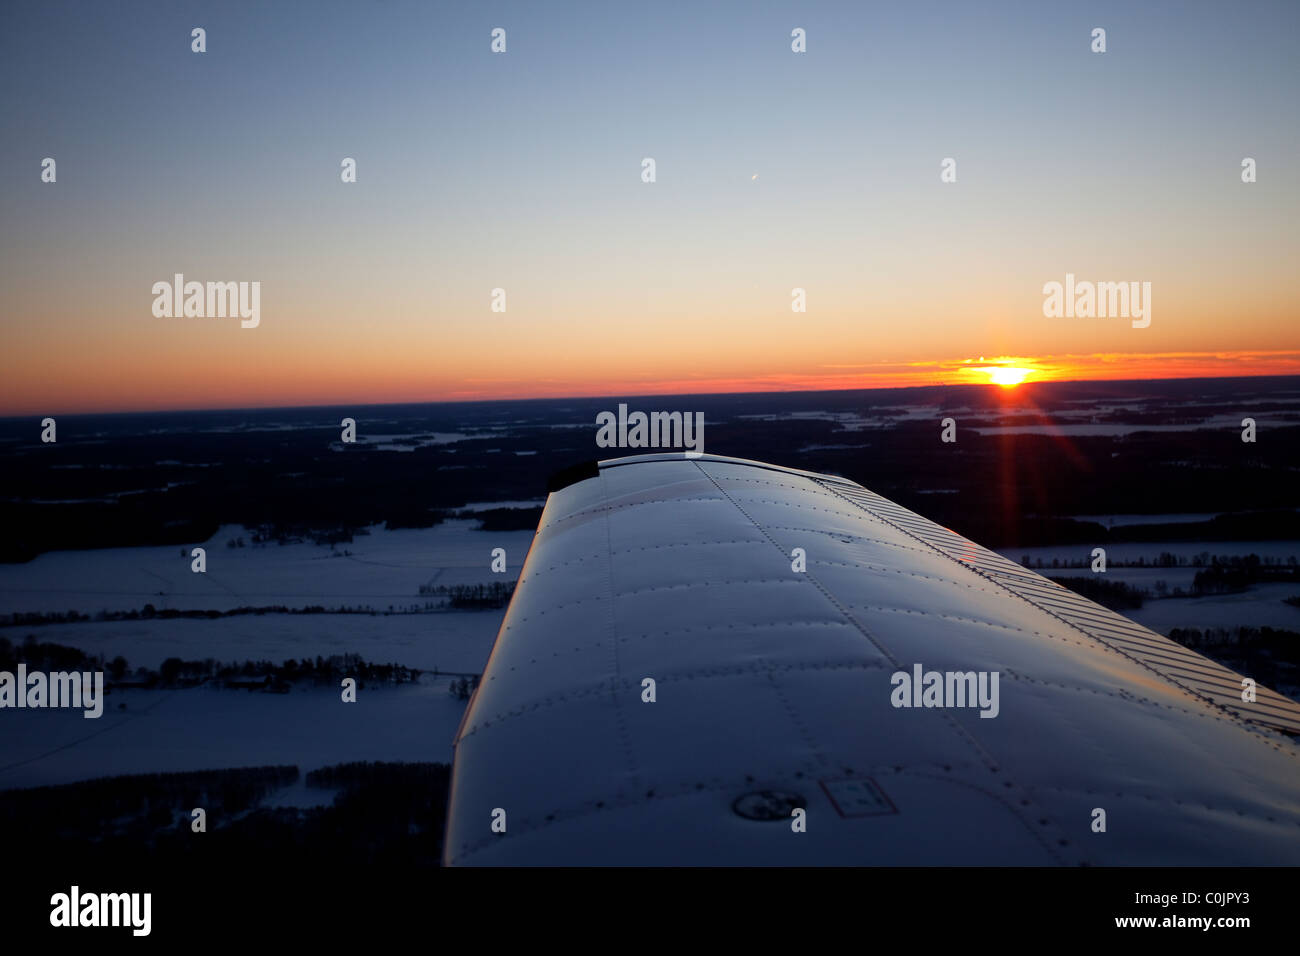 Sunrise from inside of a small aeroplane Stock Photo